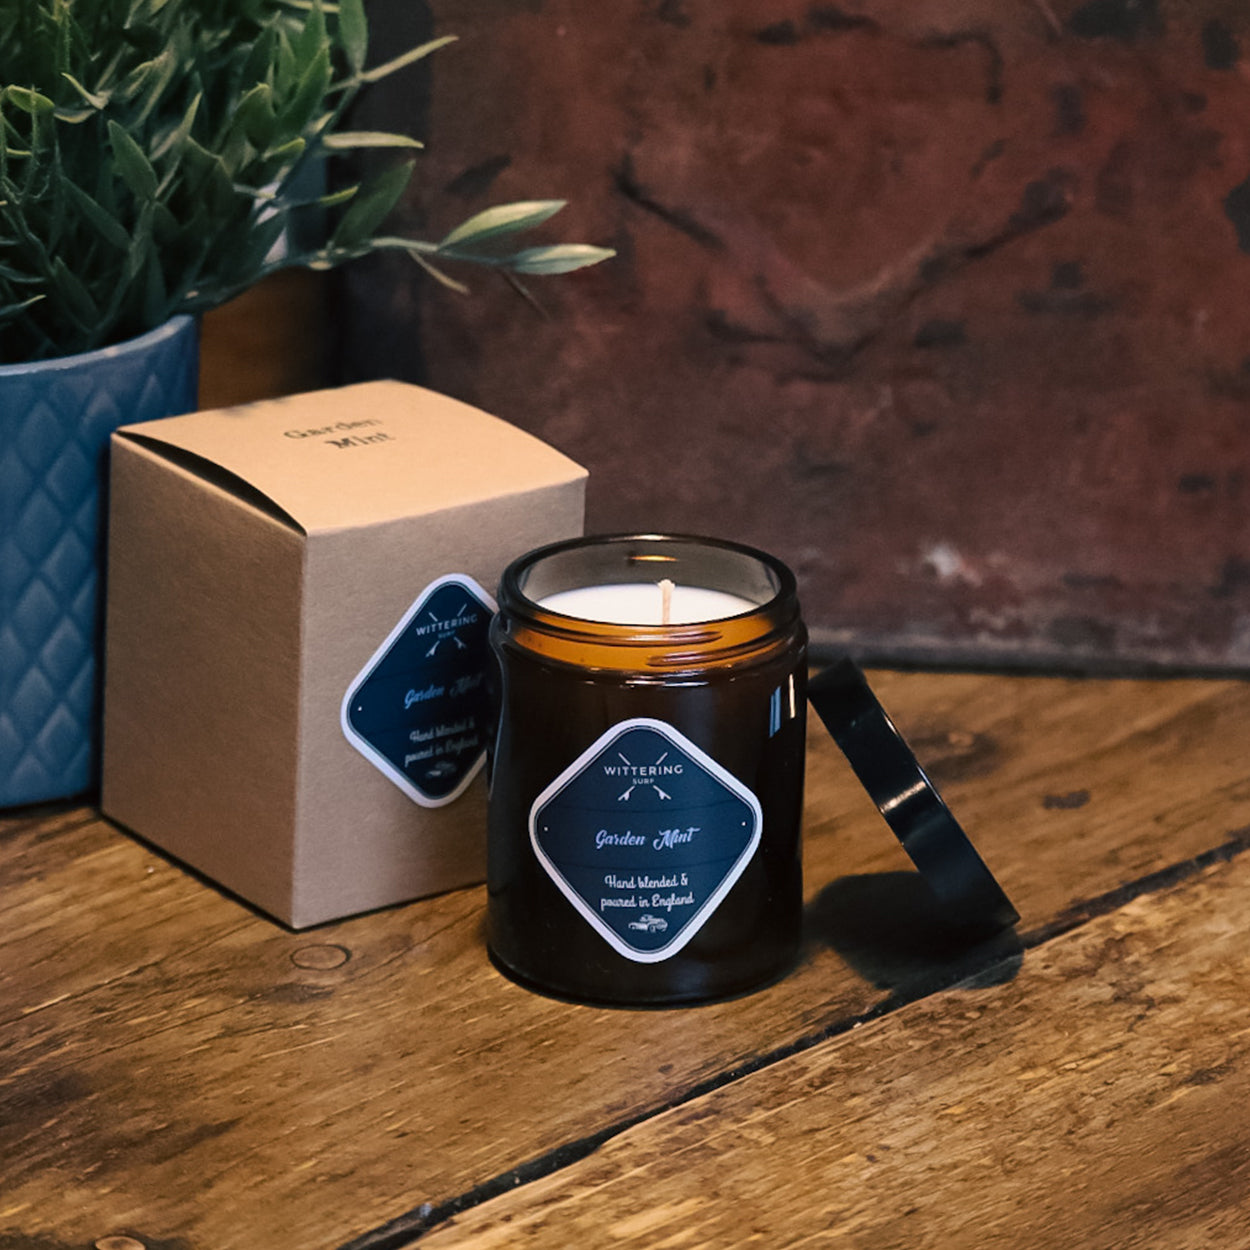 HAND POURED SOY CANDLE - GARDEN MINT - Wittering Surf Shop